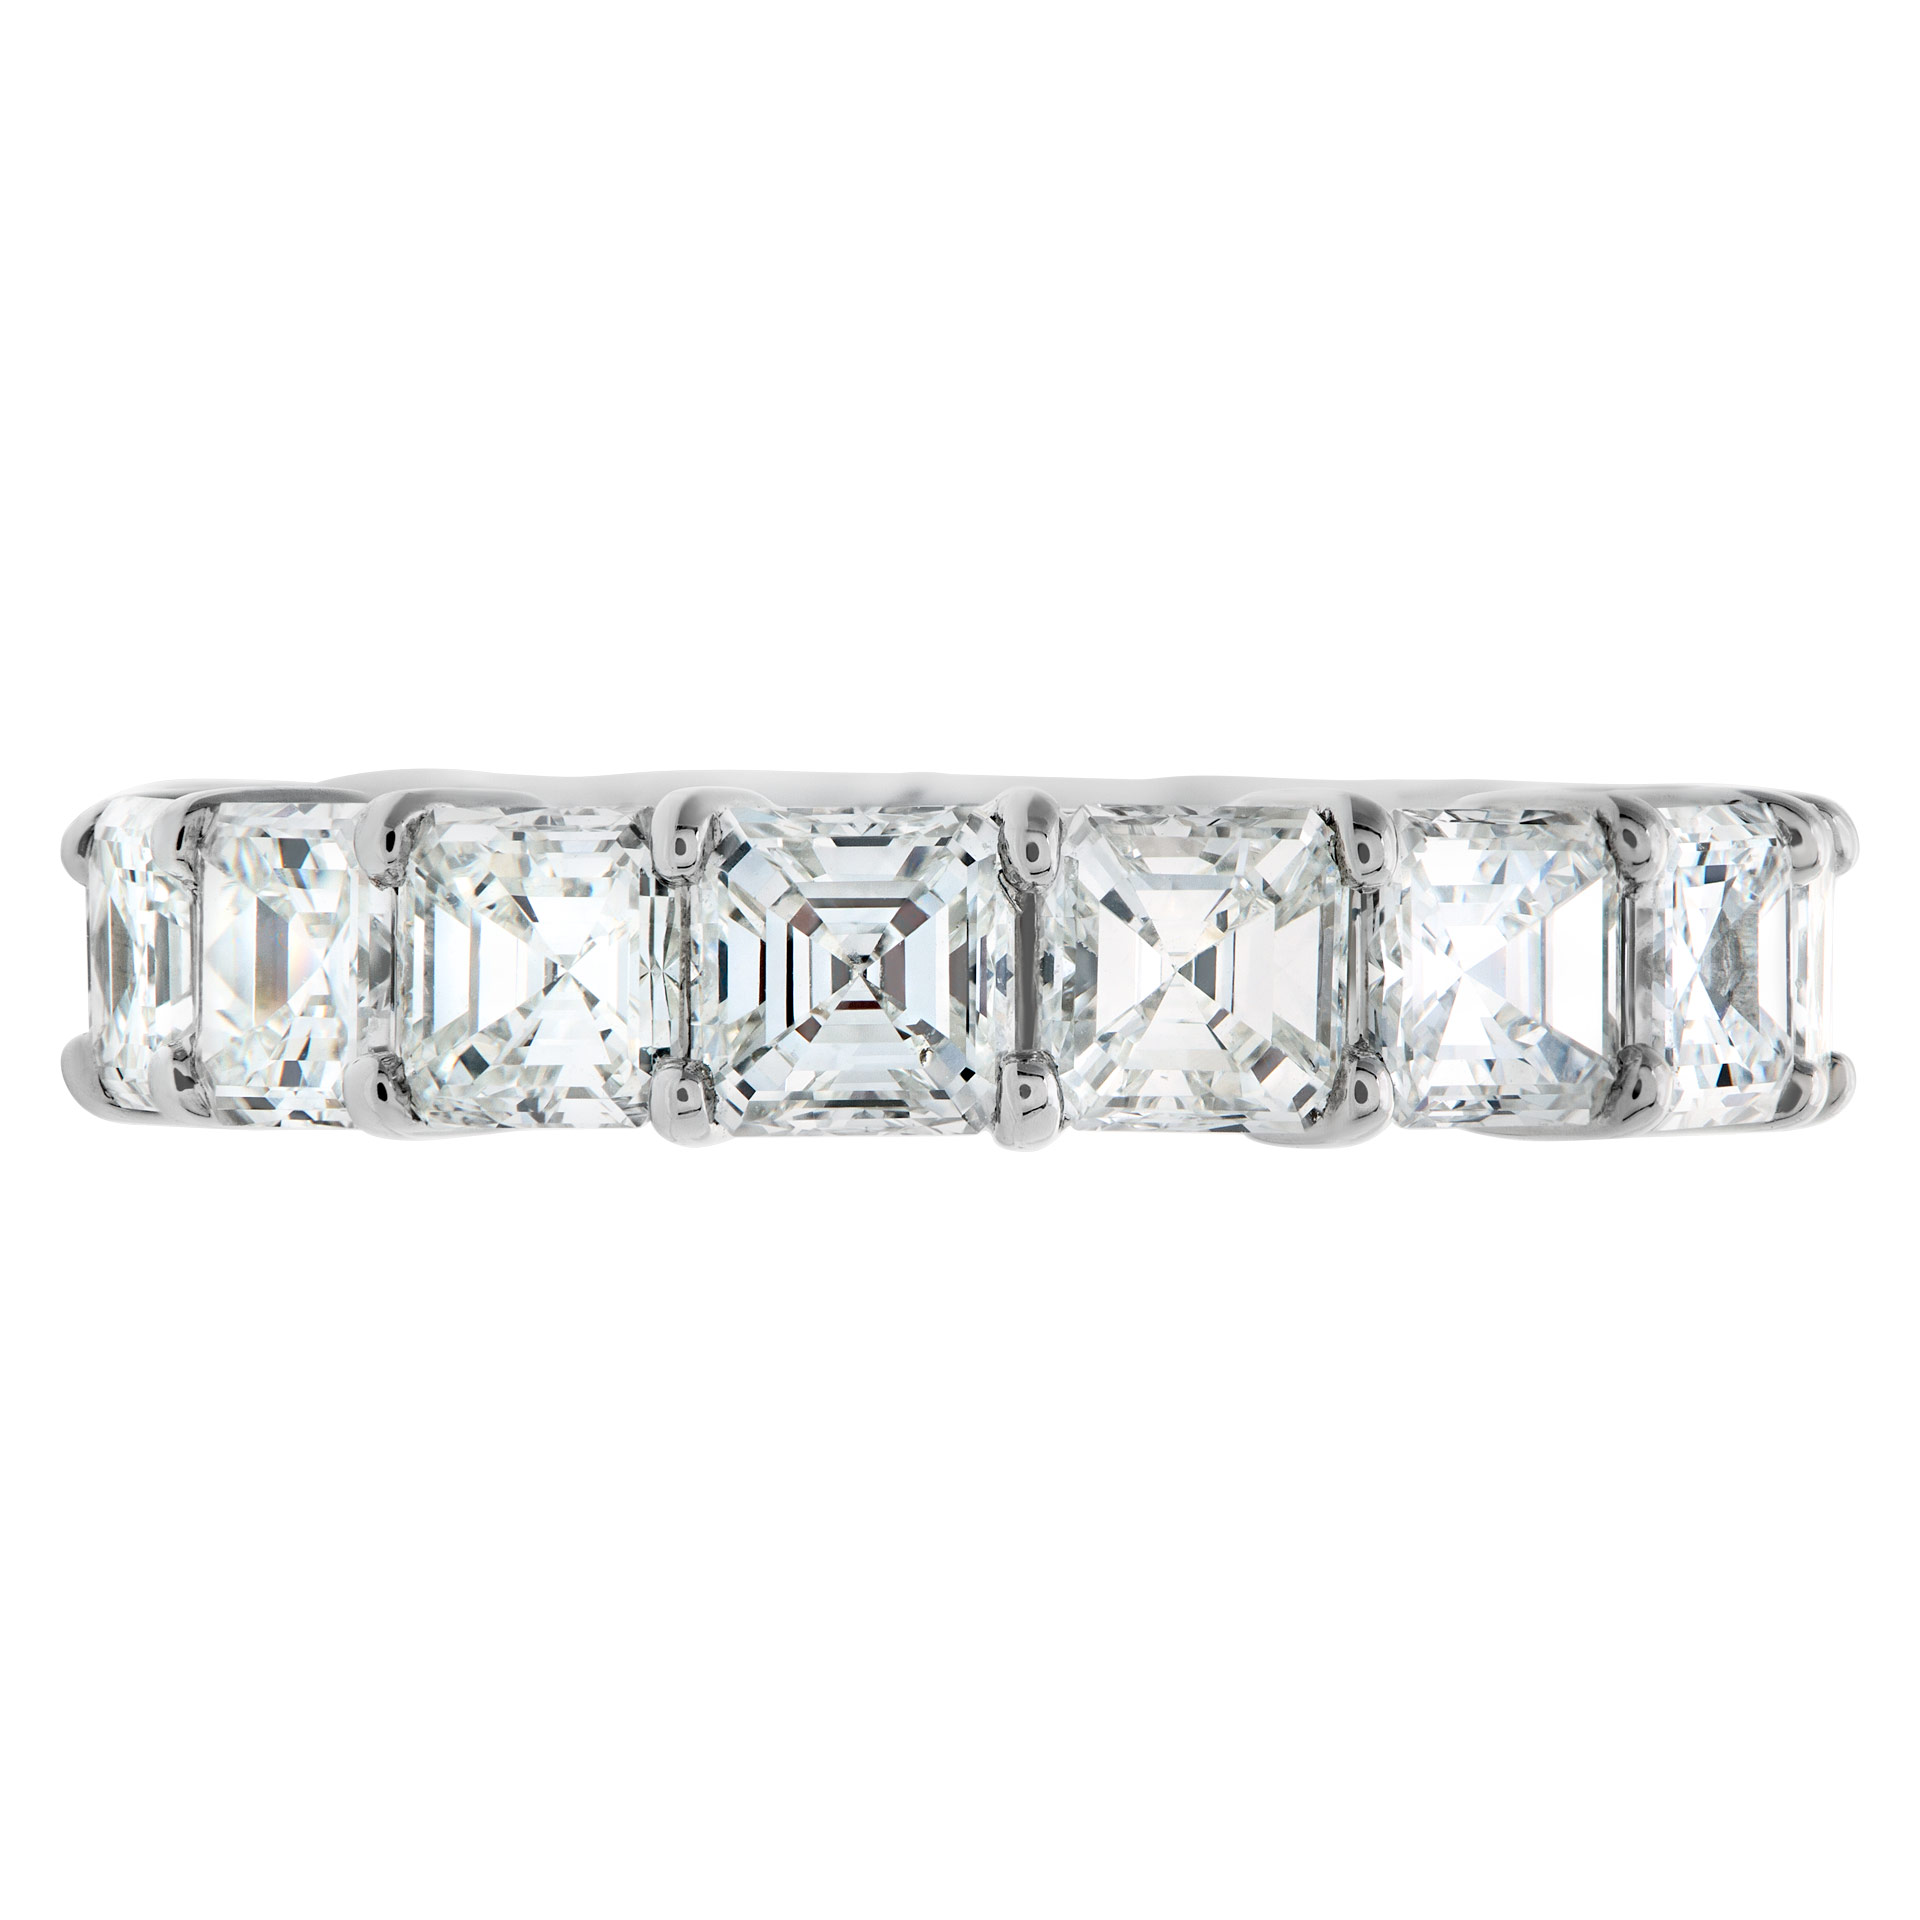 Diamond eternity band  asscher cut in platinum with 4.62 carats image 2